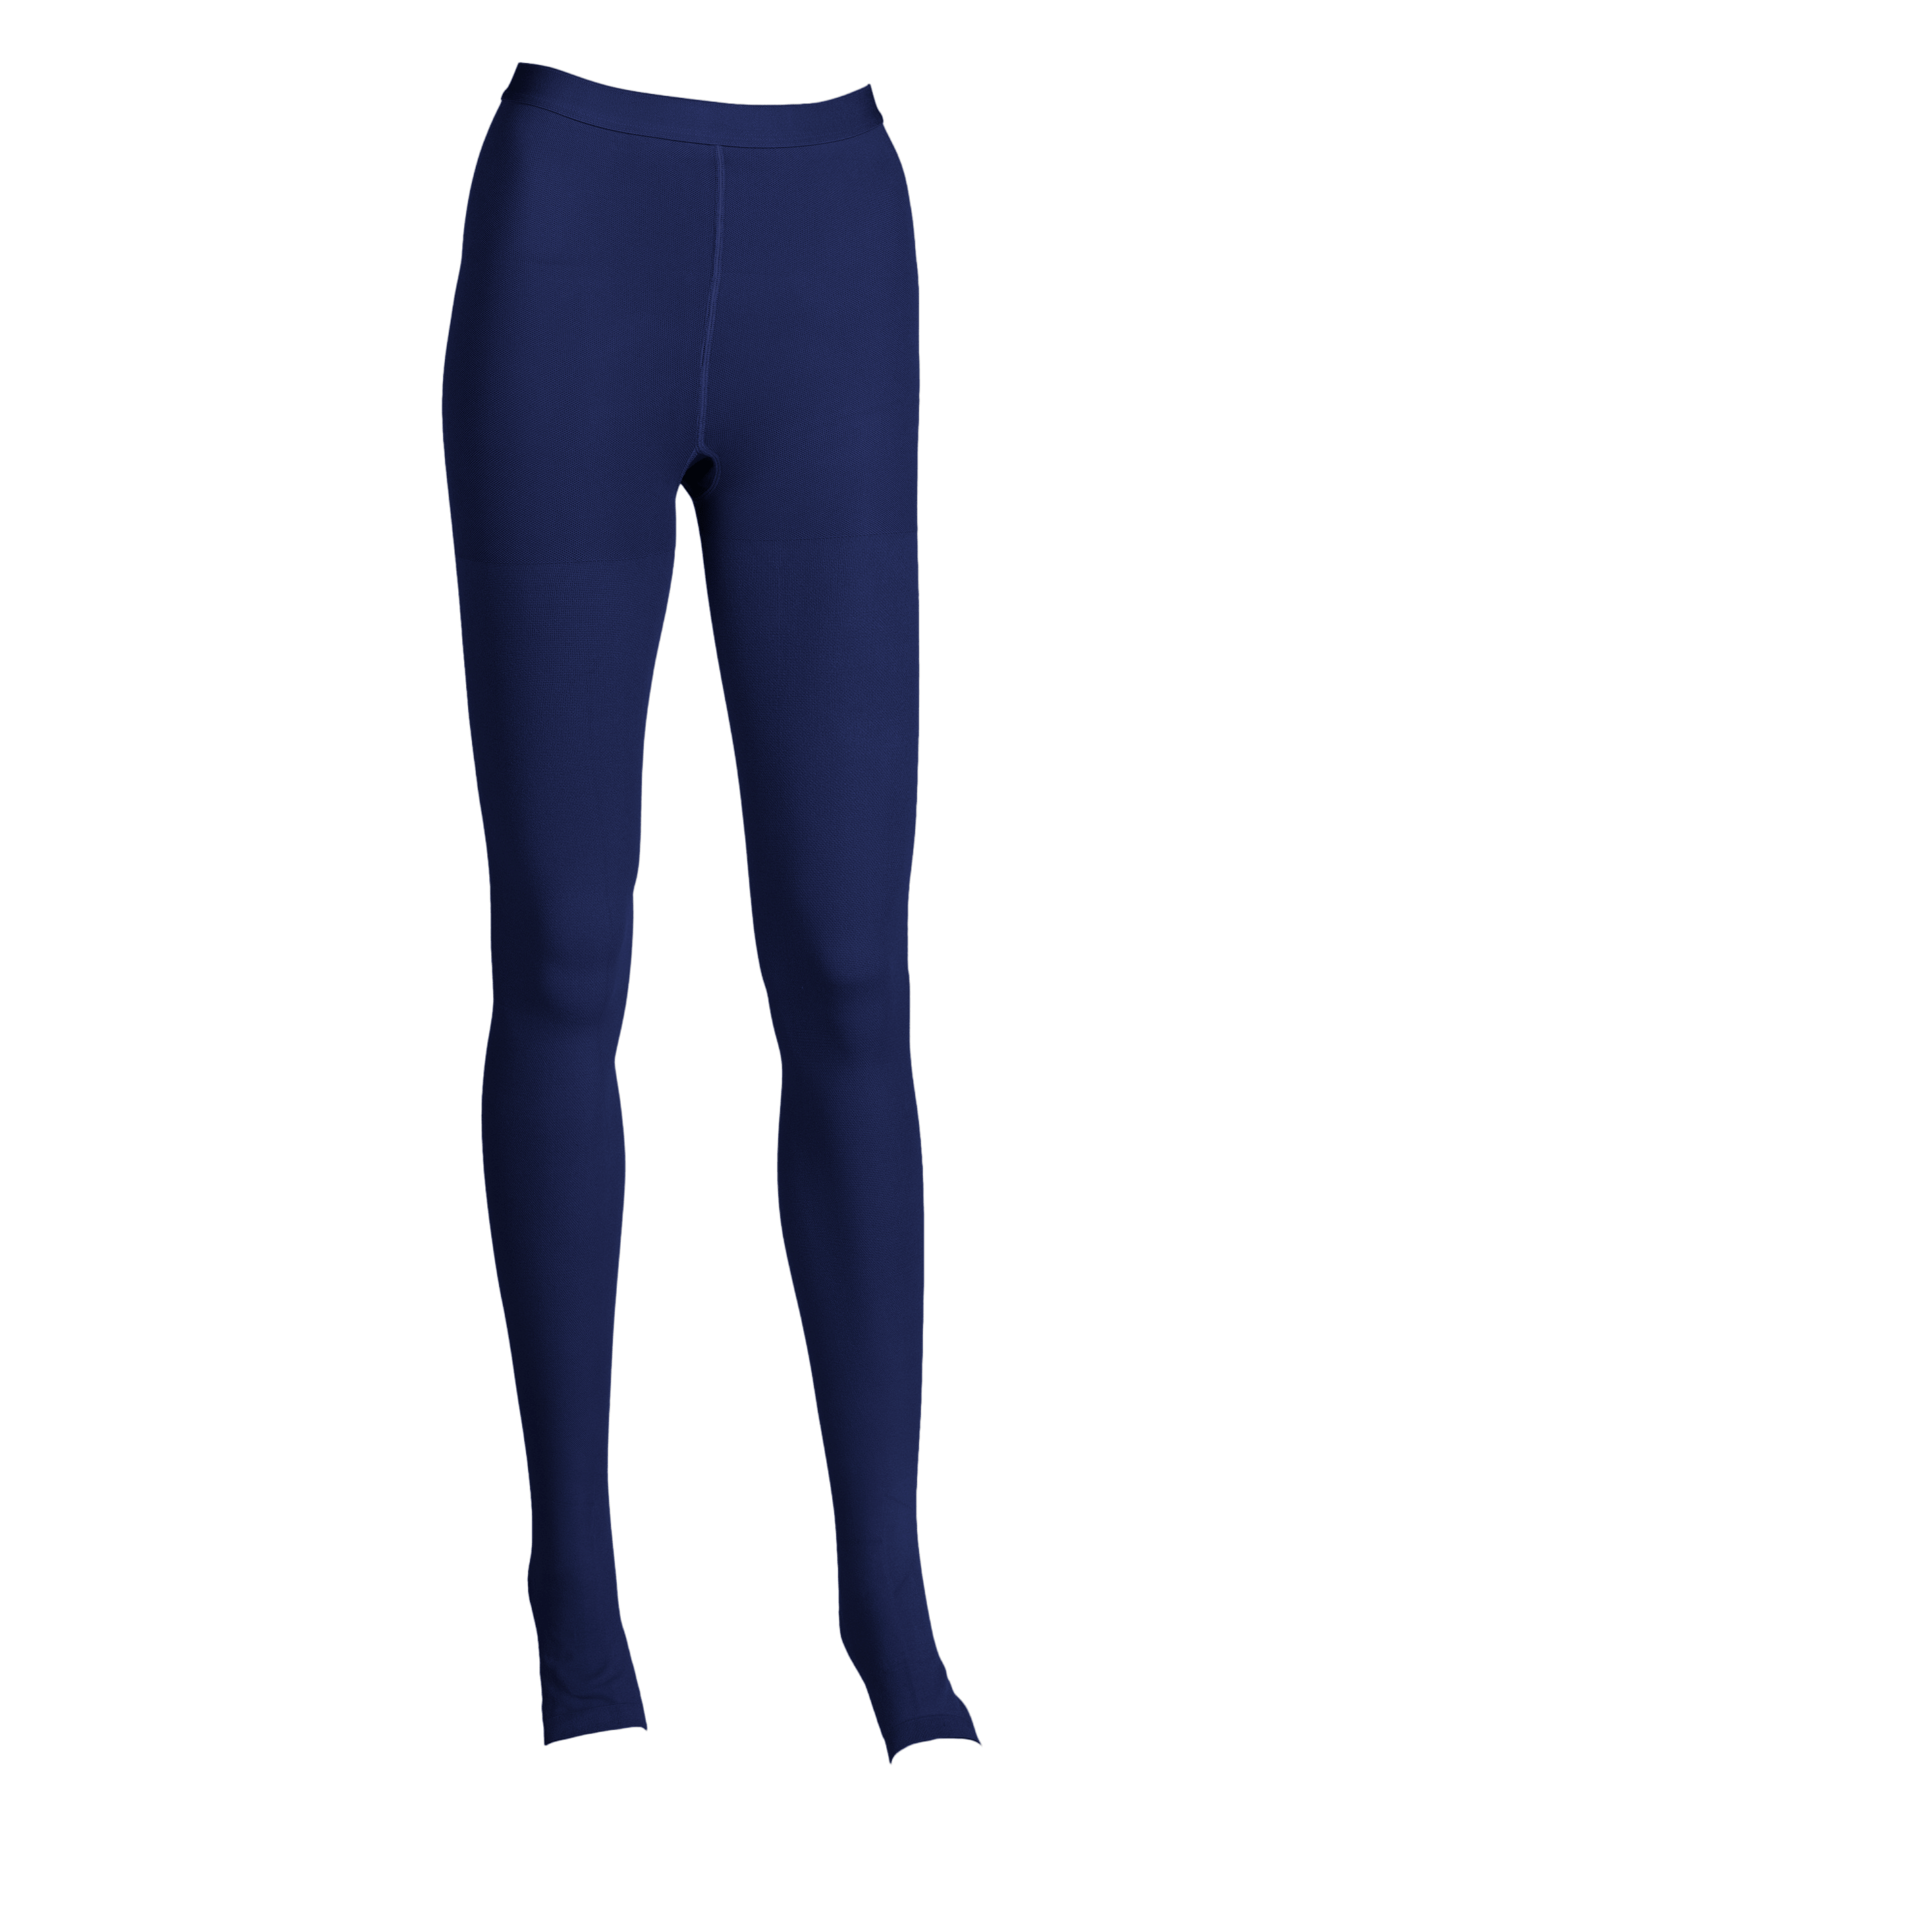 Plus Size Womens Compression Tights 20-30mmHg with Open Toe - Navy, 4XL 